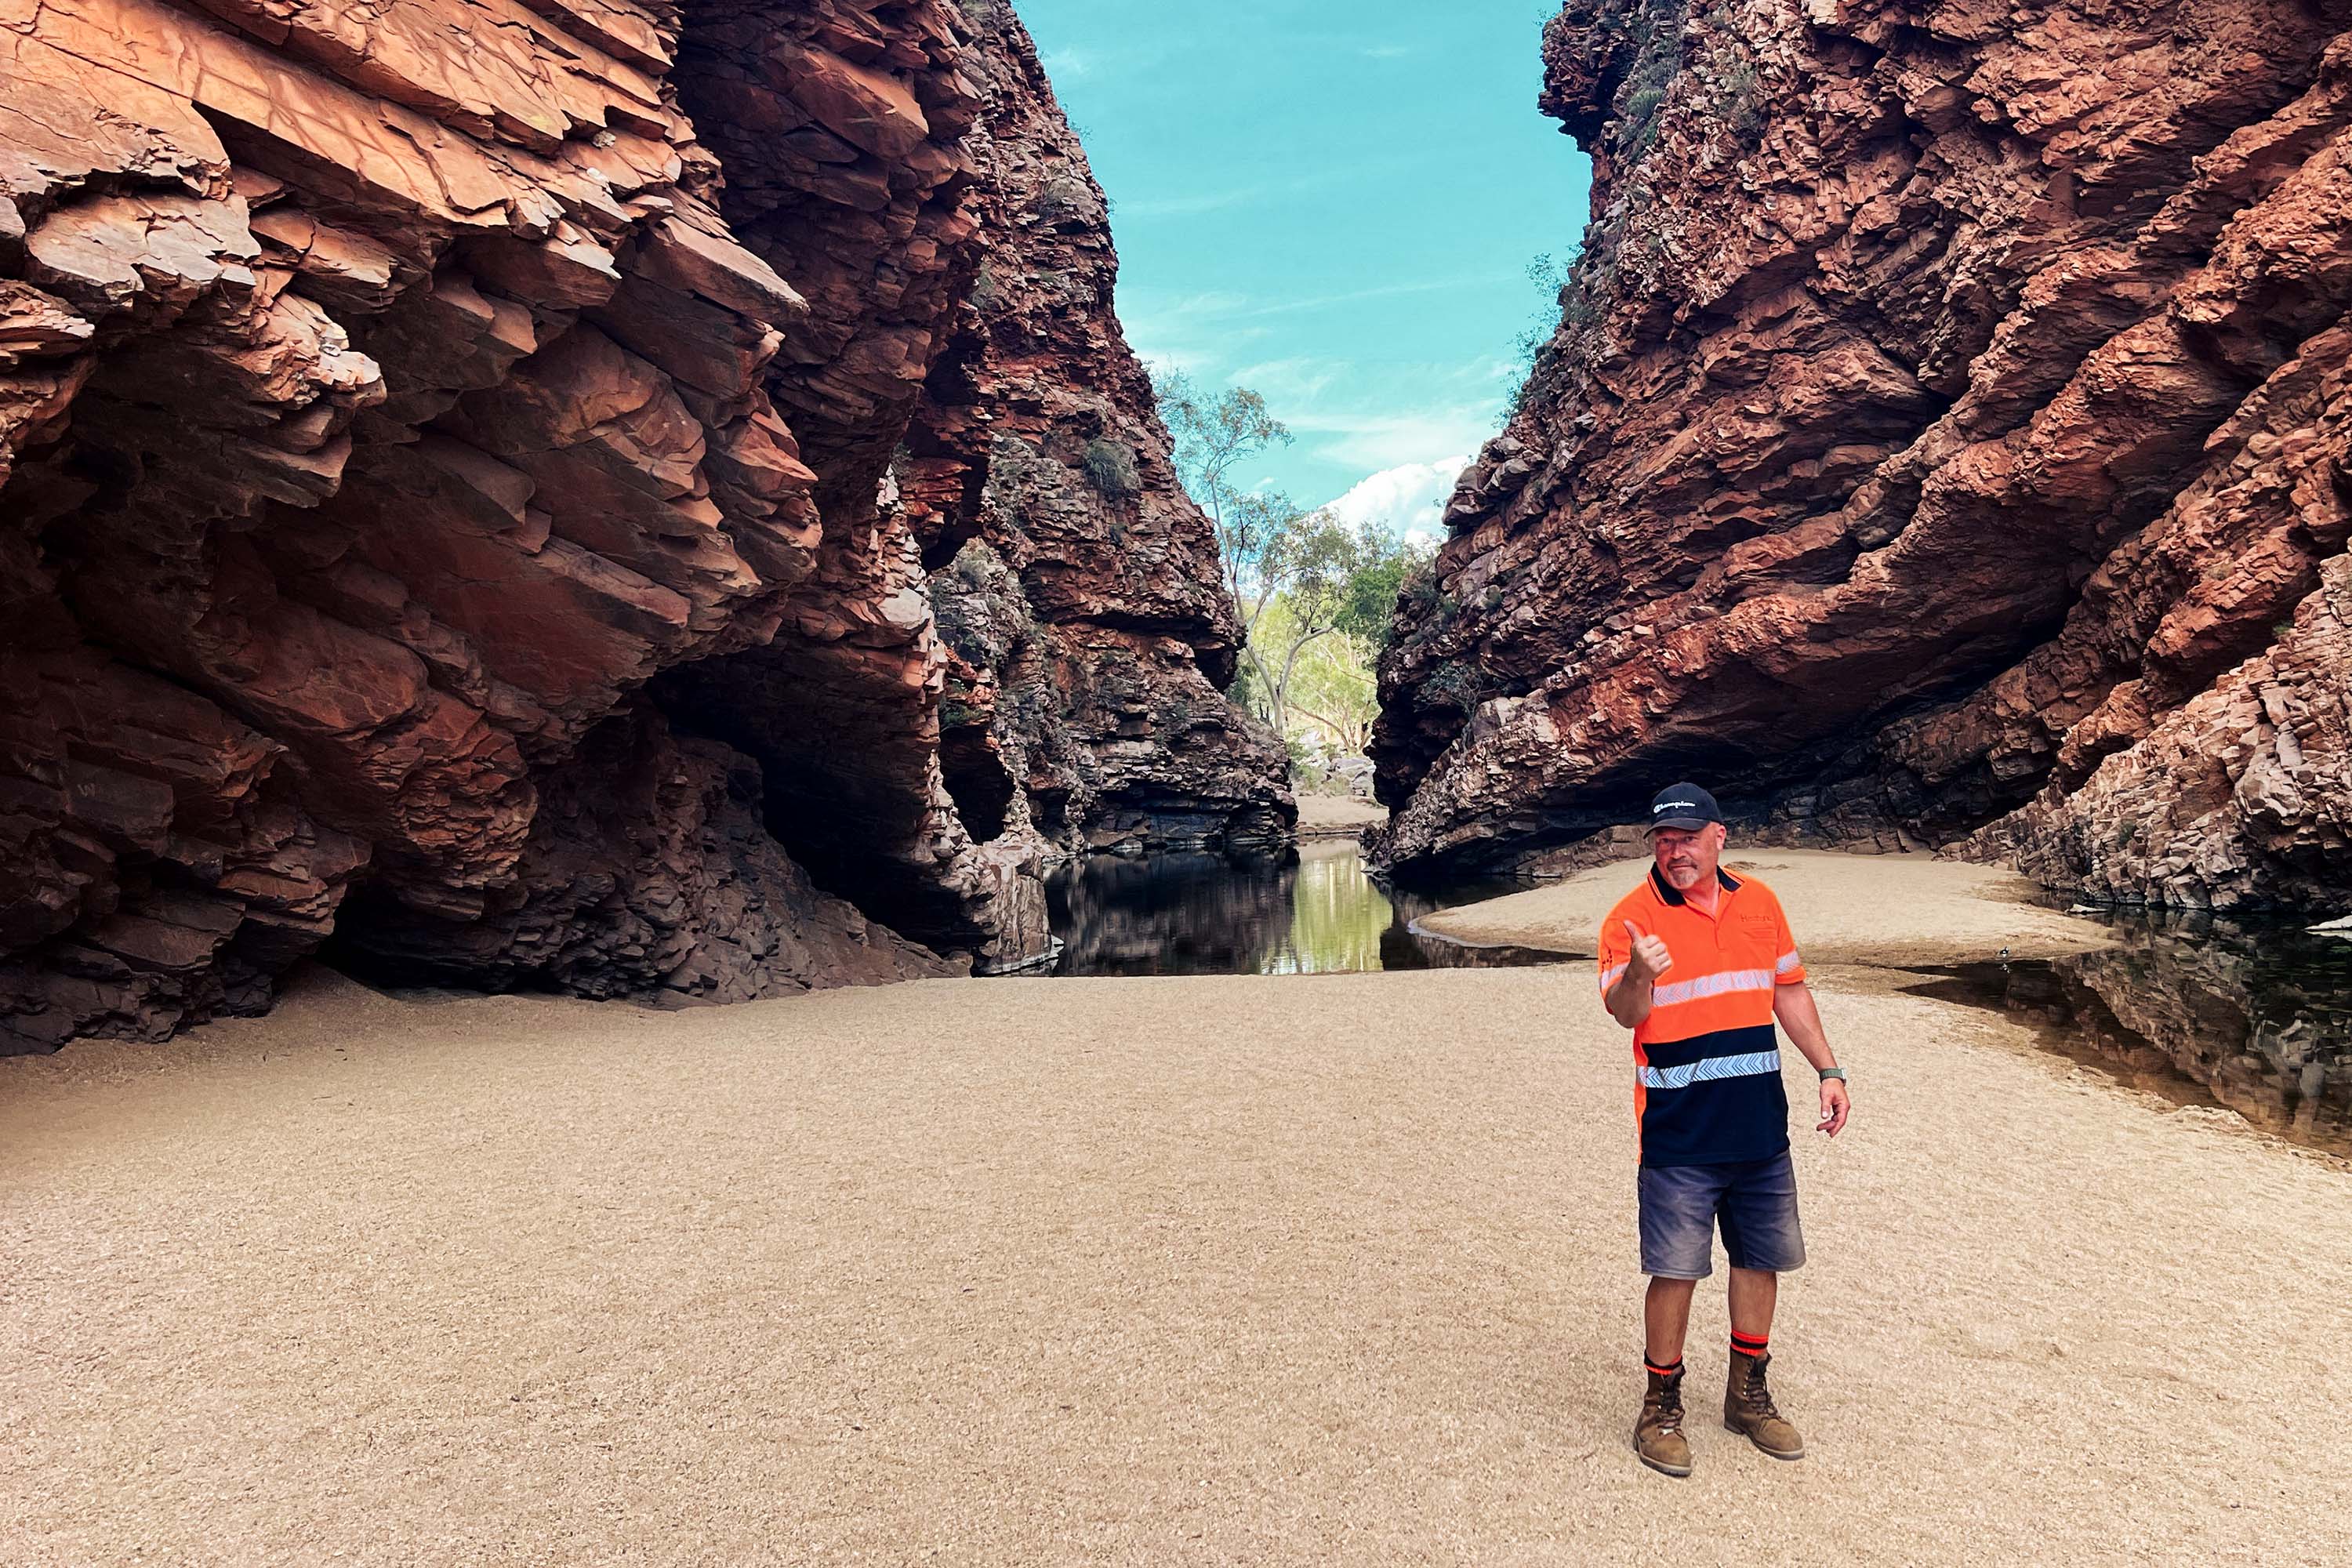 A person in orange work clothes stands on a beach between two rocks and gives the thumbs up.